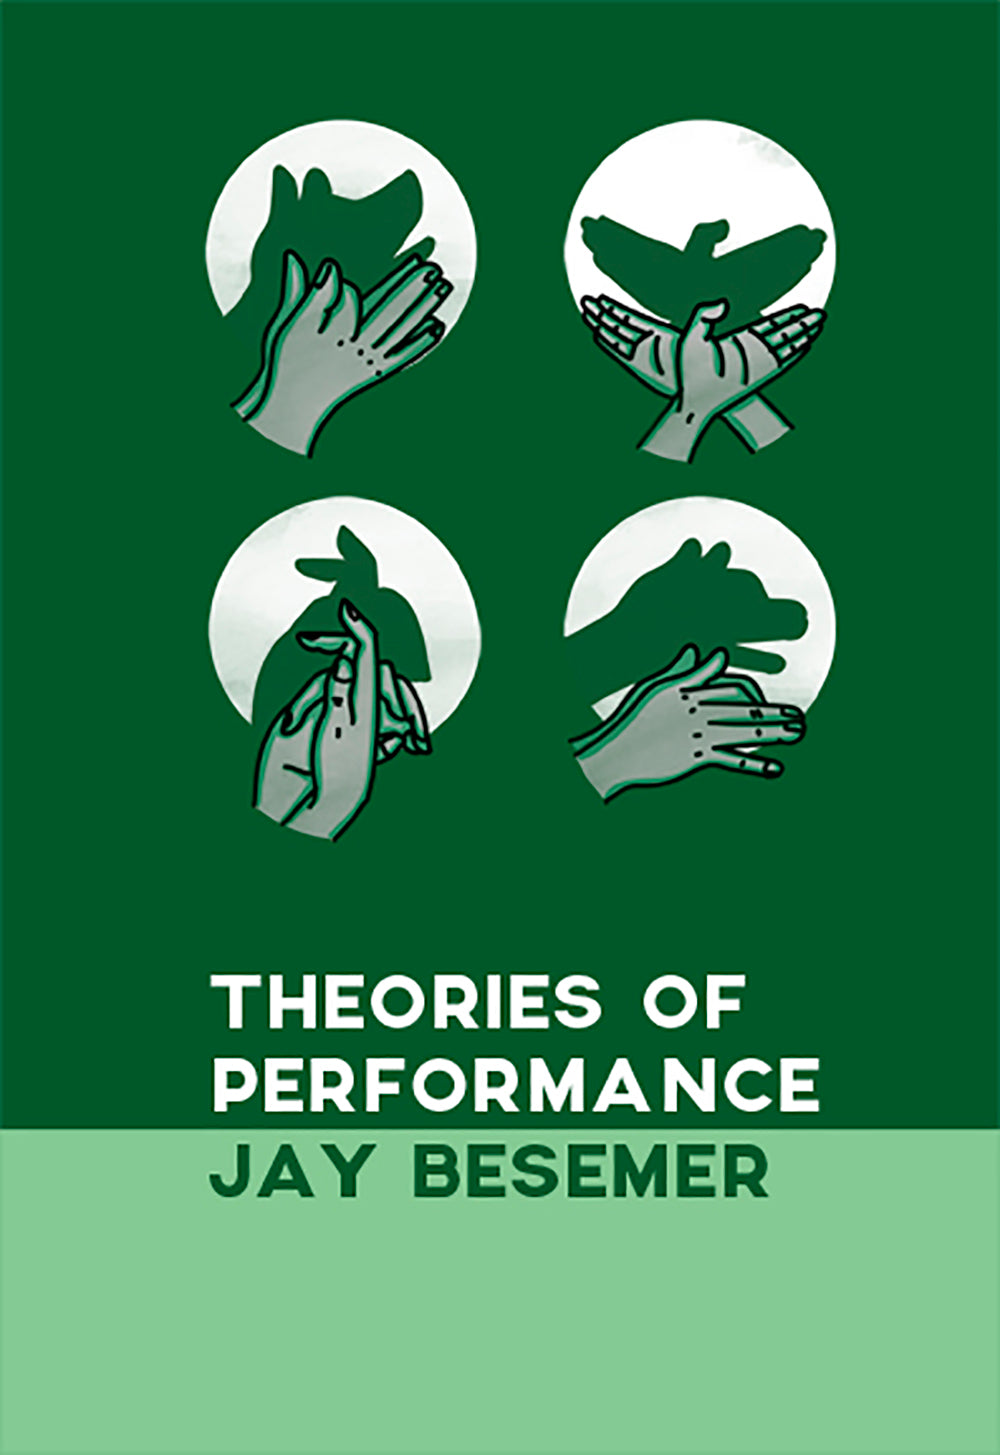 Besemer, Jay: Theories of Performance